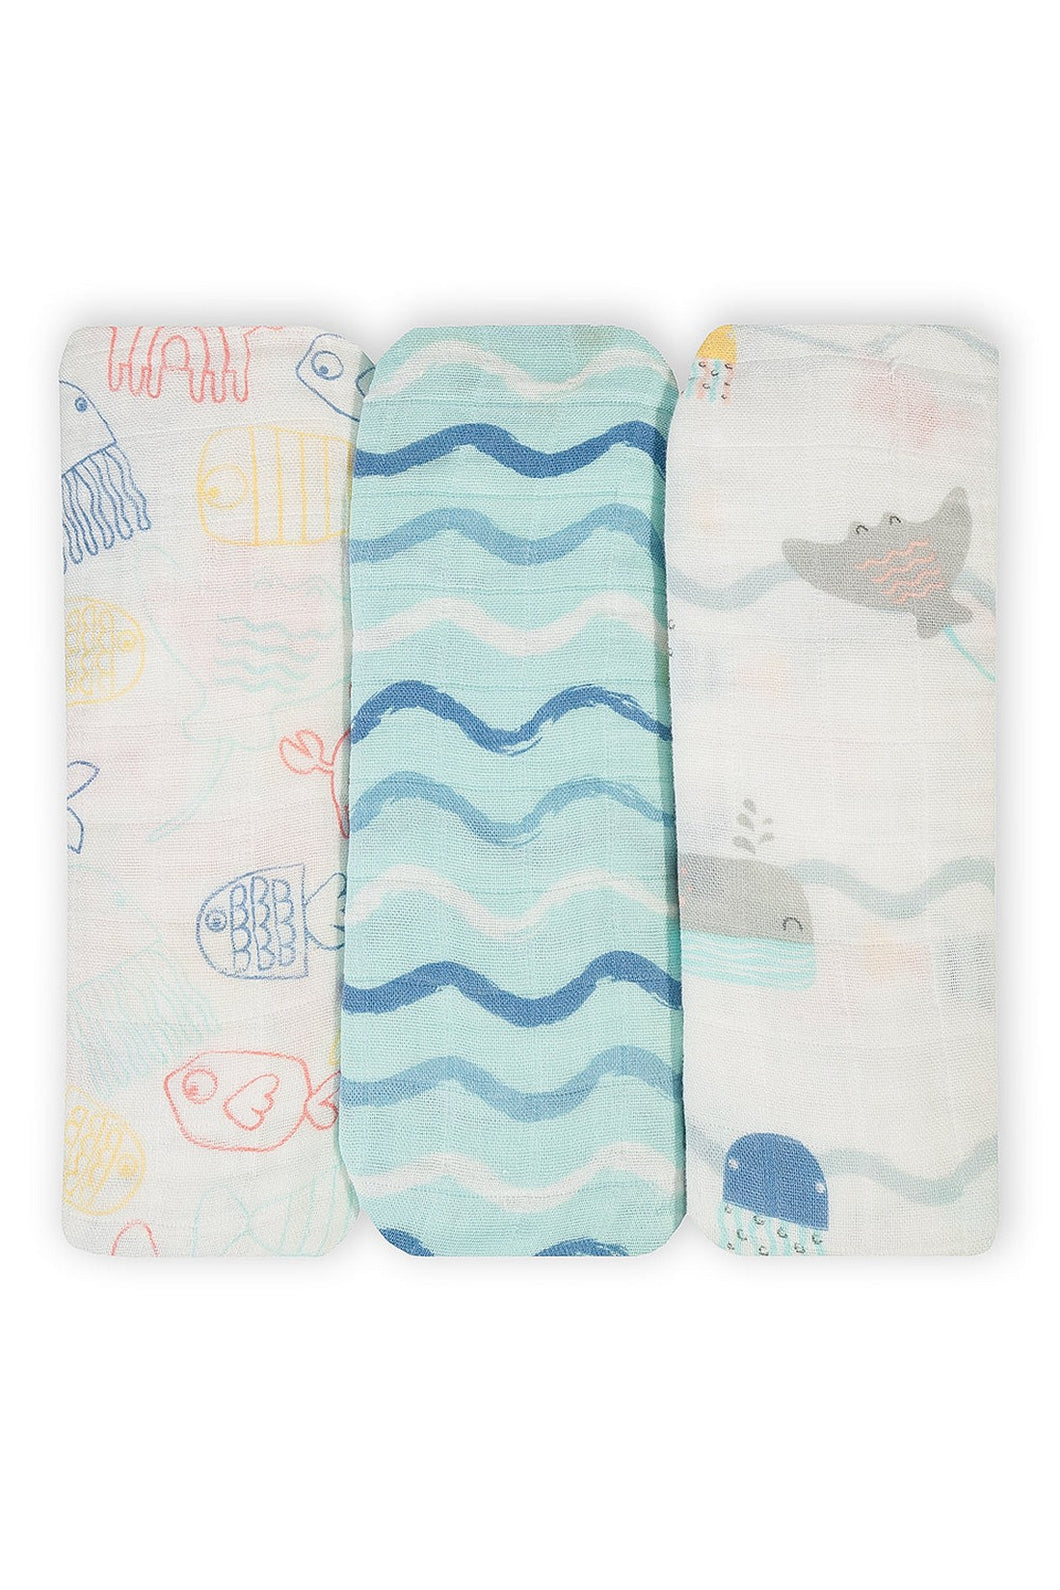 Not Too Big Bamboo Swaddle Sea World - 3 Pack